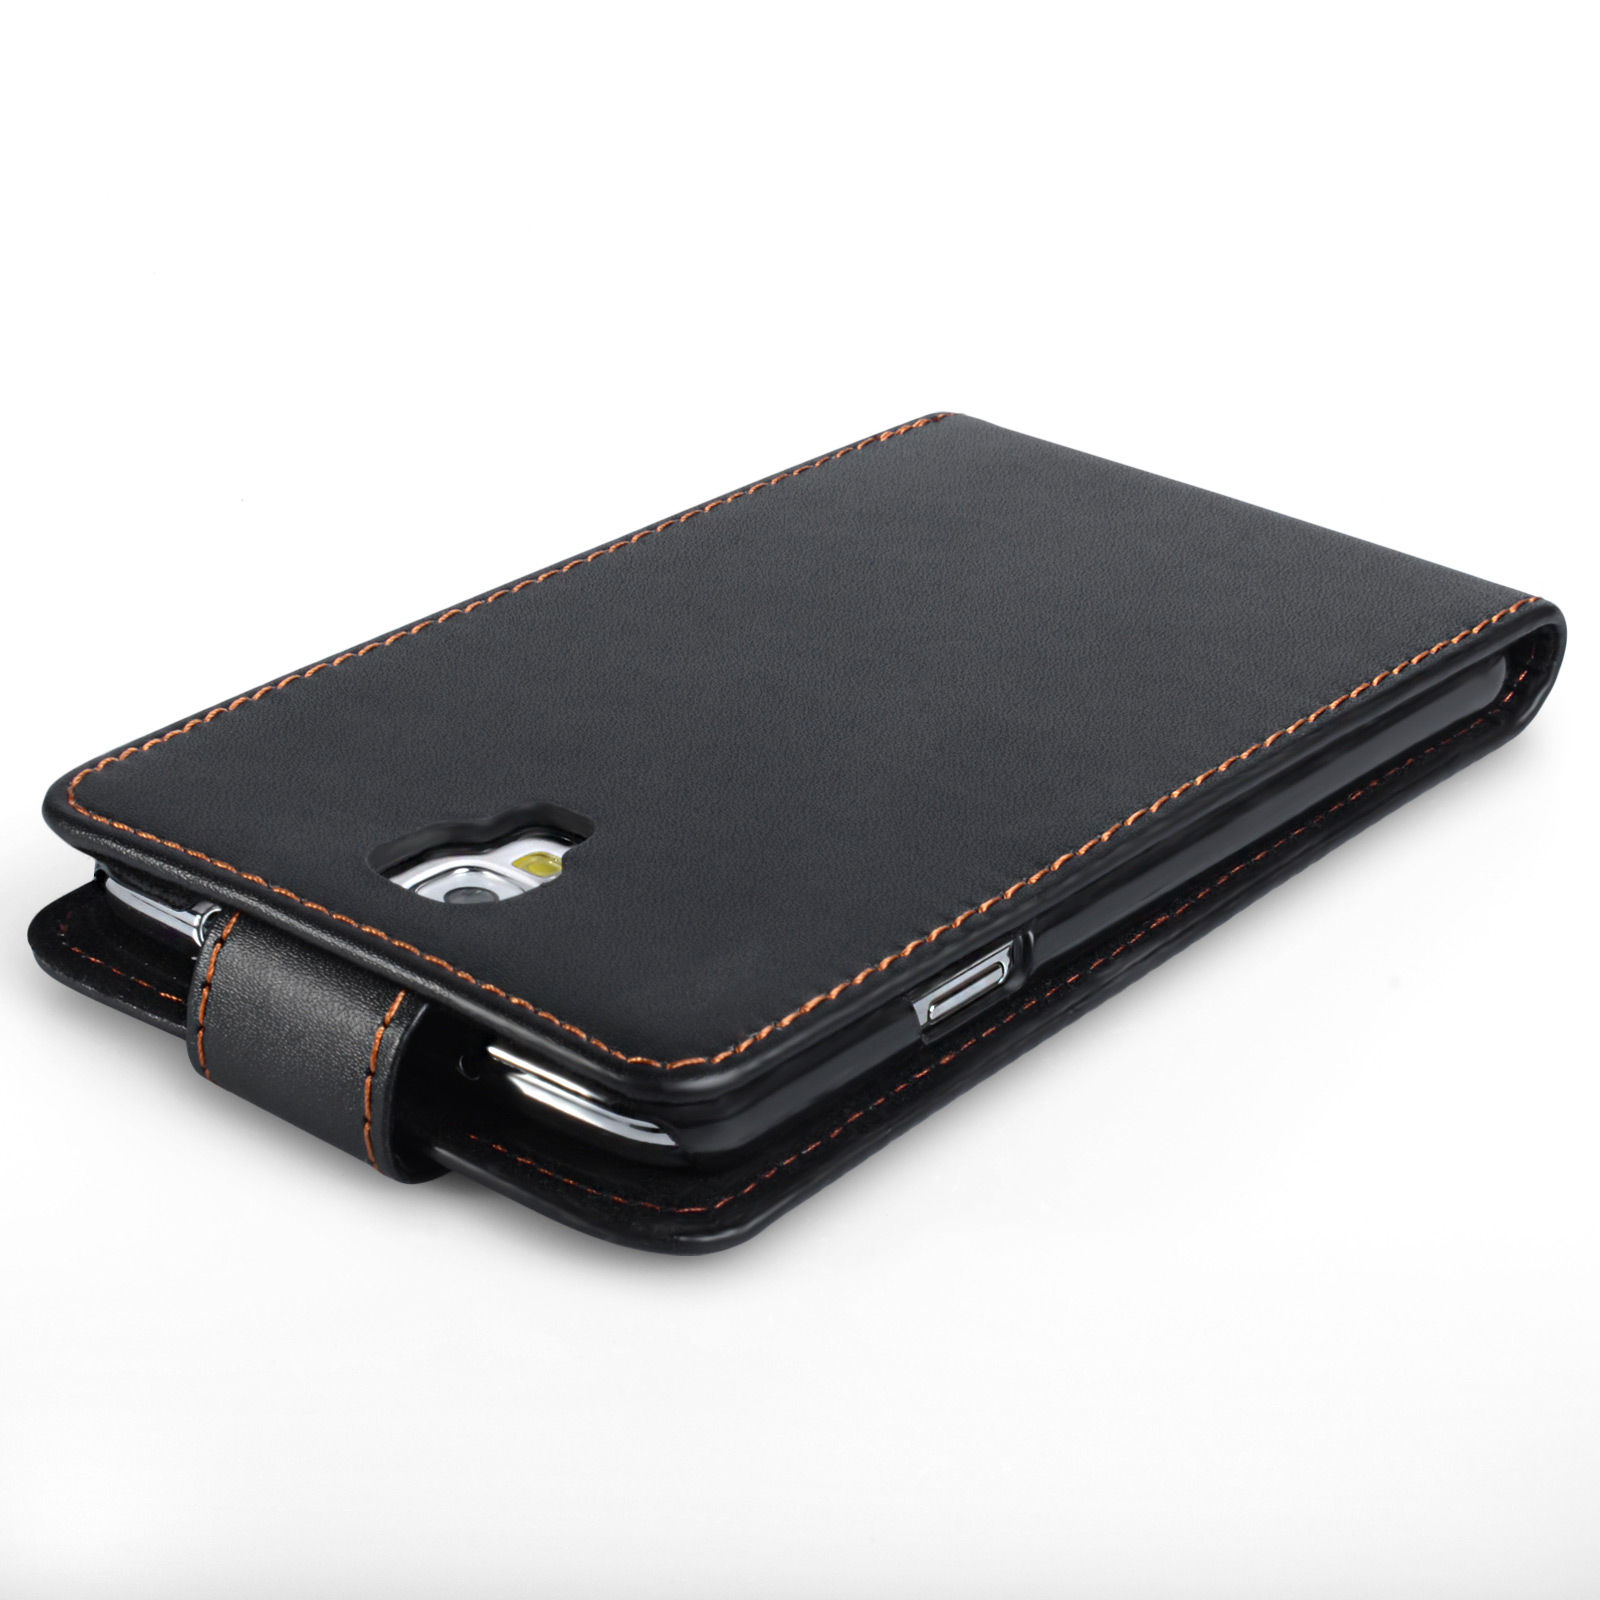 YouSave Samsung Galaxy Note 3 Neo Leather-Effect Flip Case - Black